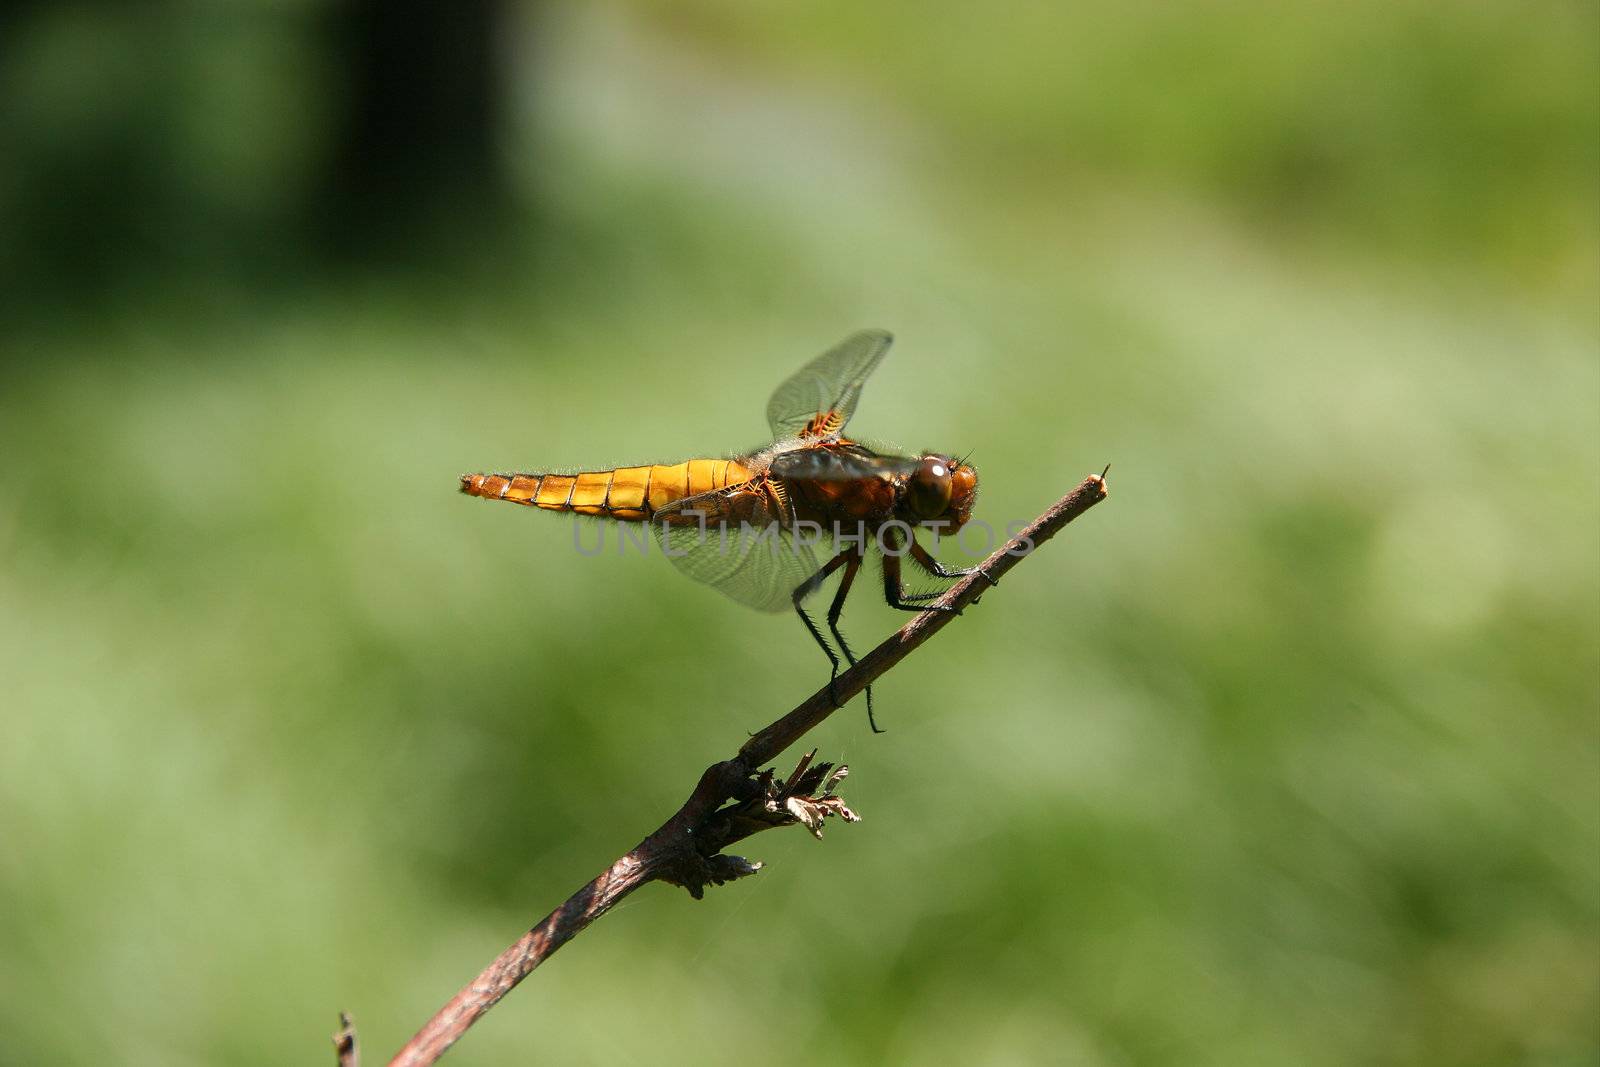 Broad-bodied Chaser (Libellula depressa) on a branch